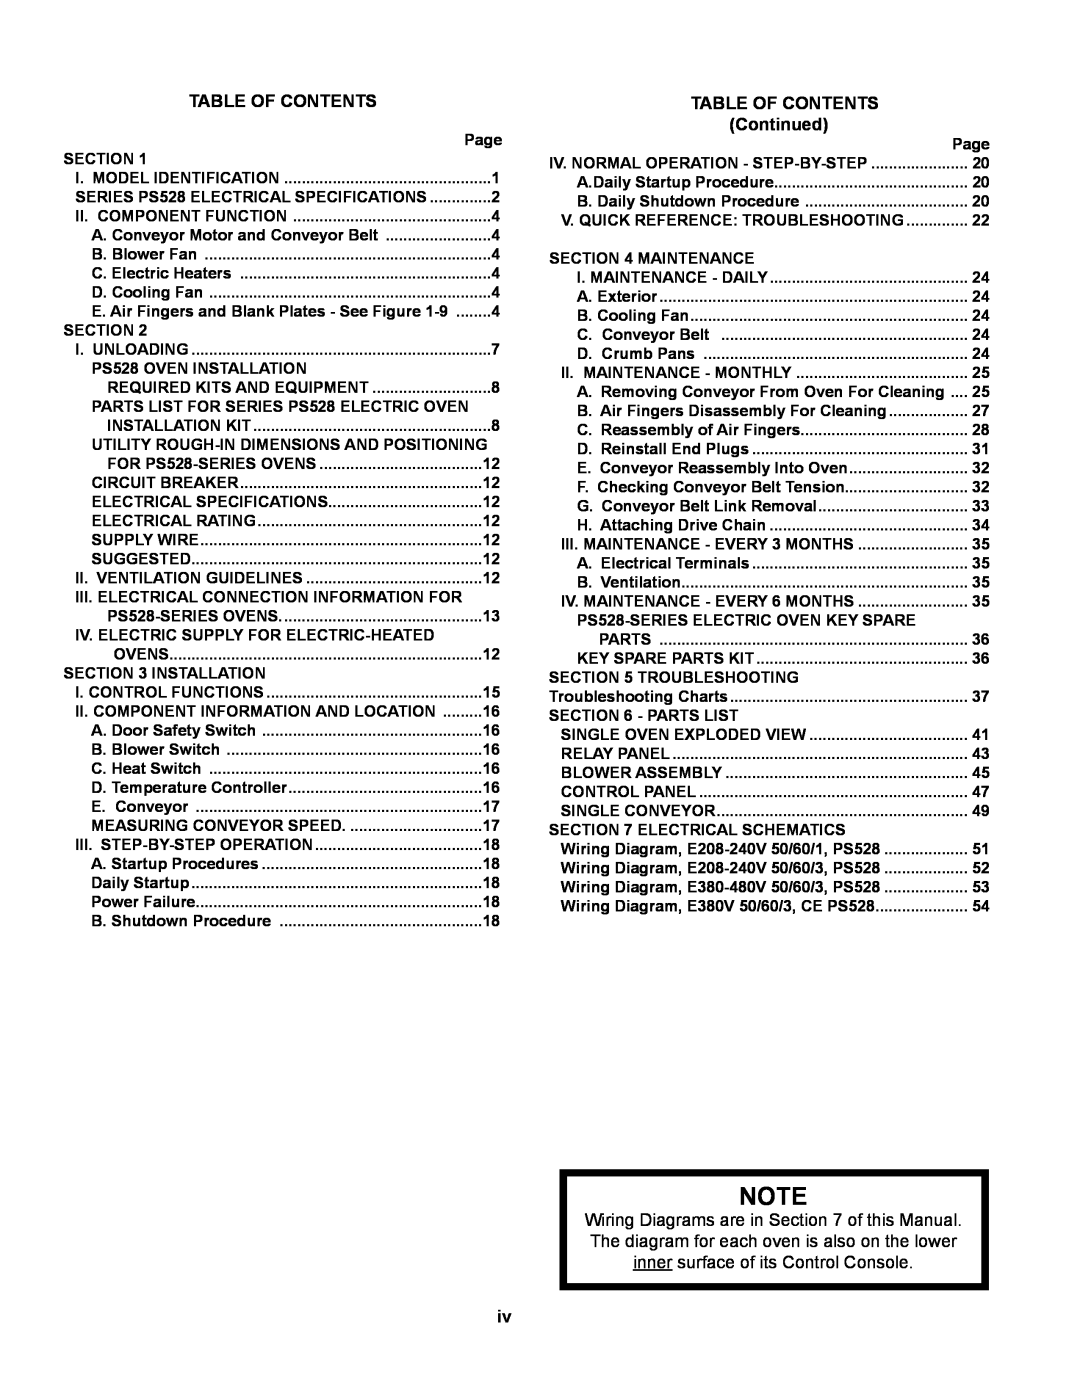 Middleby Marshall PS528 (Double) Table Of Contents, Continued, SERIES PS528 ELECTRICAL SPECIFICATIONS, Installation Kit 